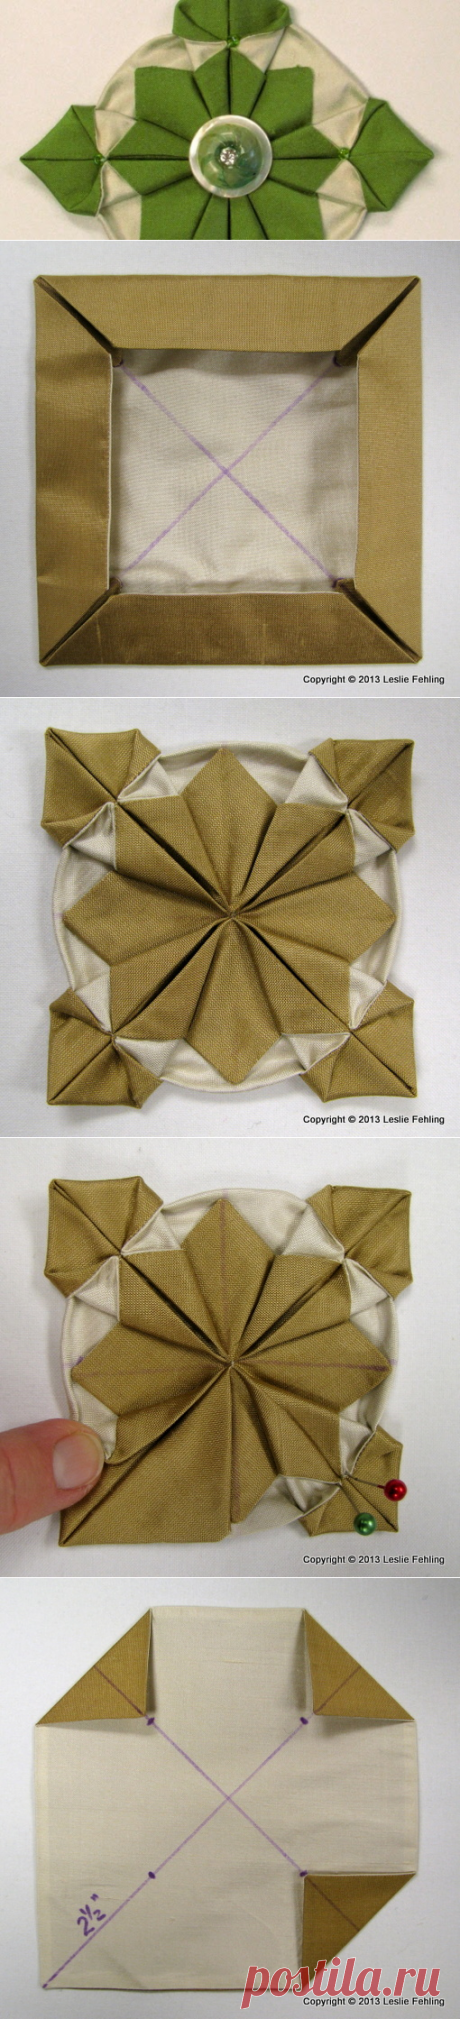 Everyday Artist: Fabric Origami Step-by-Step - &quot;Fennel&quot;